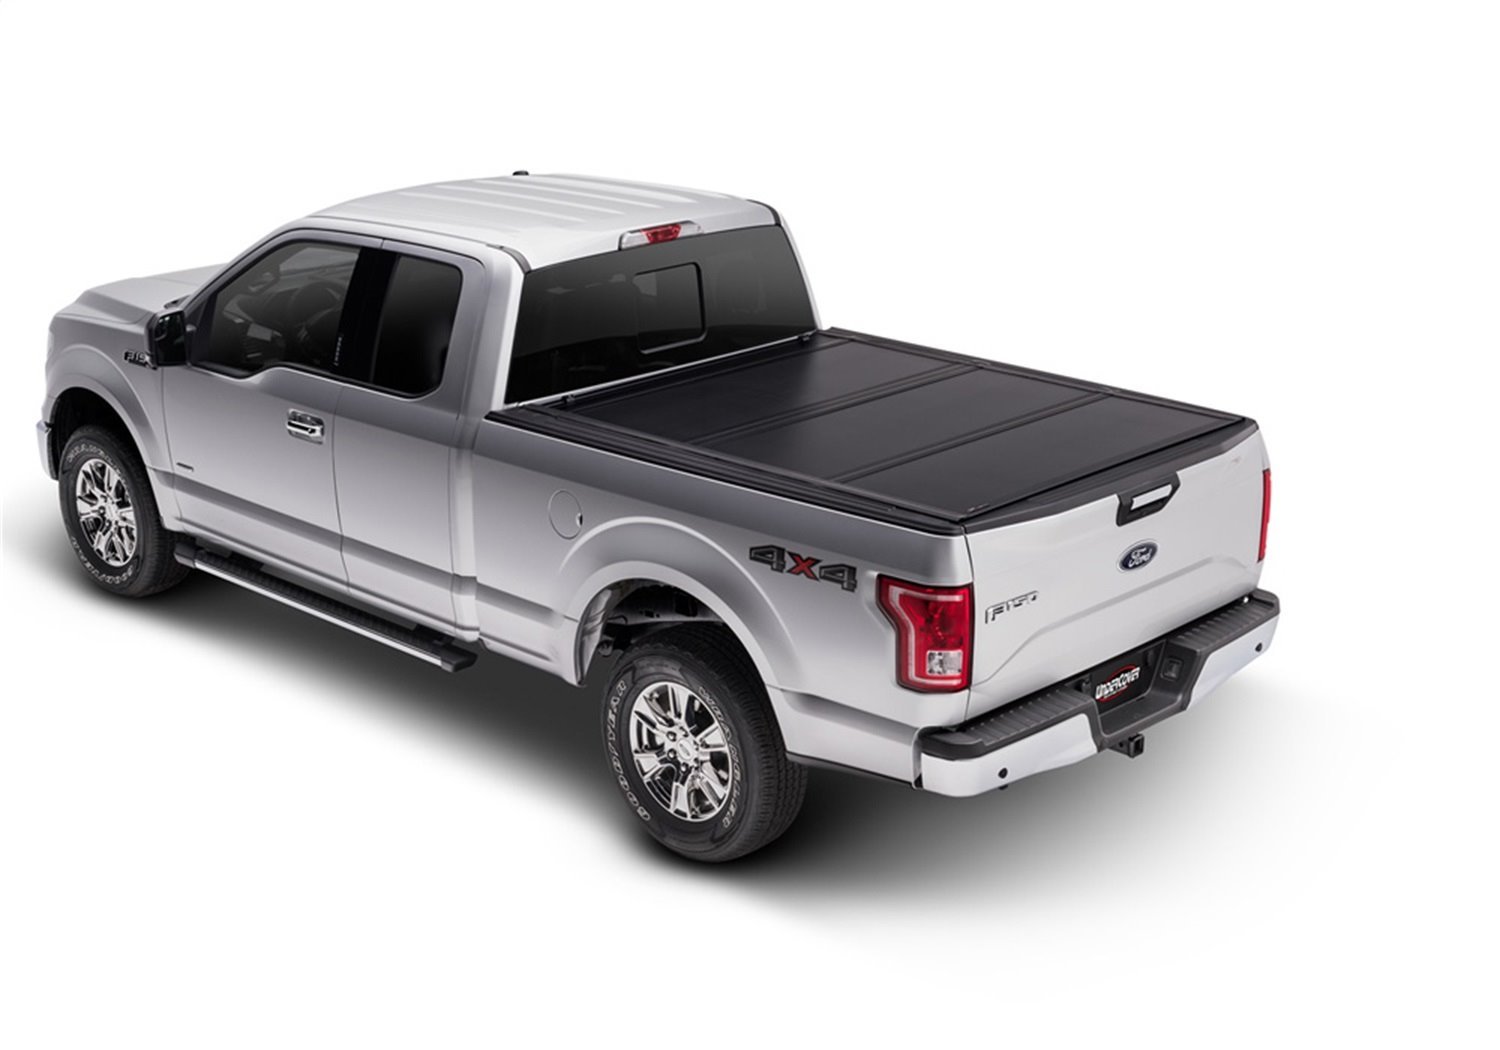 UX22019 Ultra Flex Hard Folding Cover, 2015-2020 Ford F-150 5'7" Bed EXT/Crew, Matte Black Finish